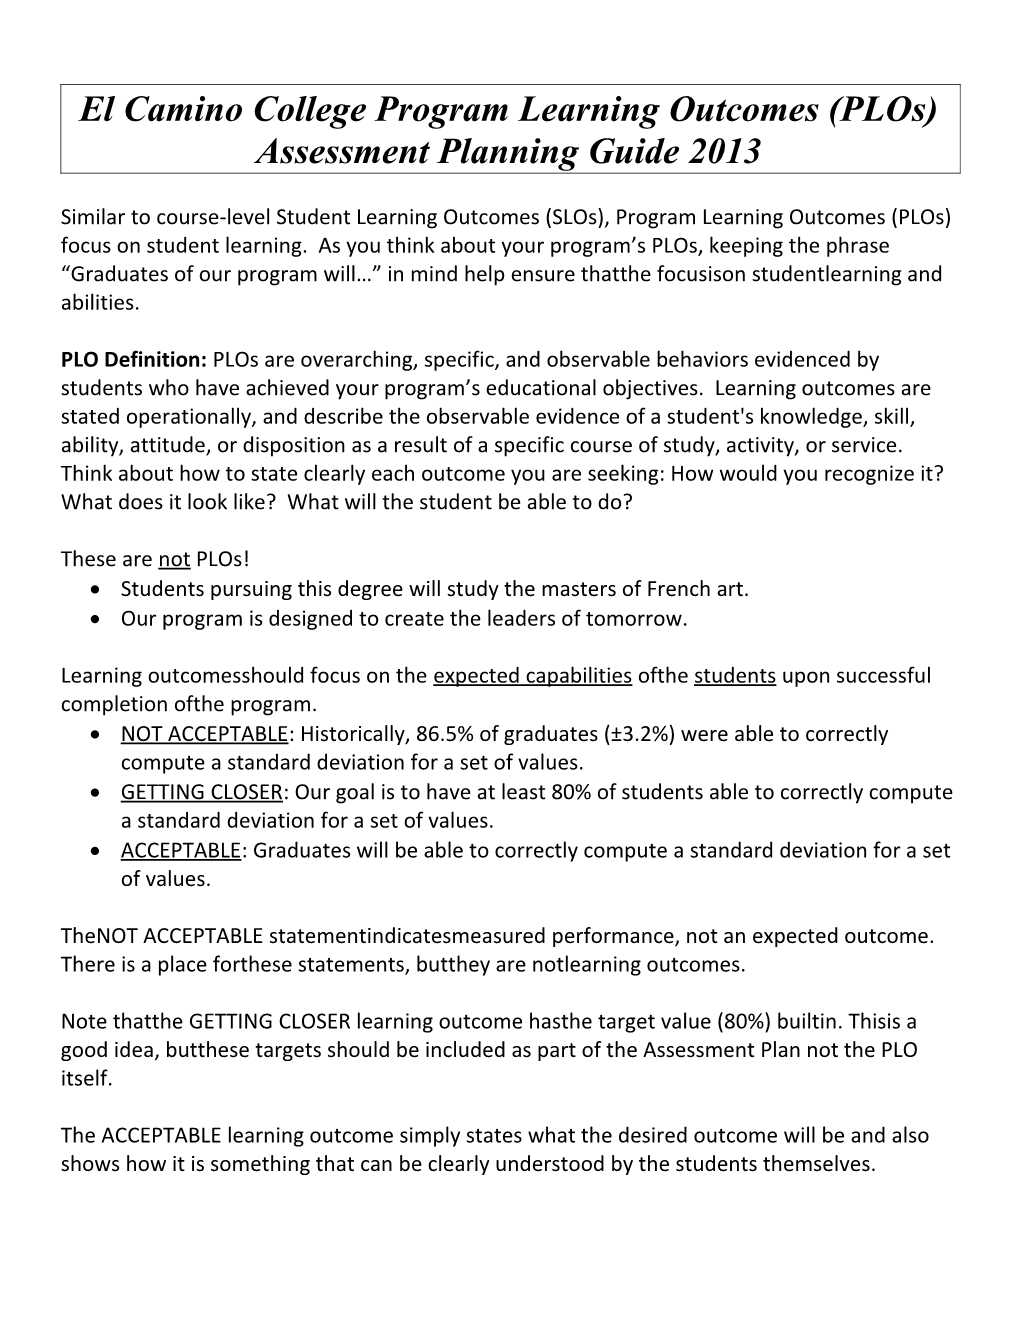 El Camino College Program Learning Outcomes (Plos) Assessment Planning Guide 2013